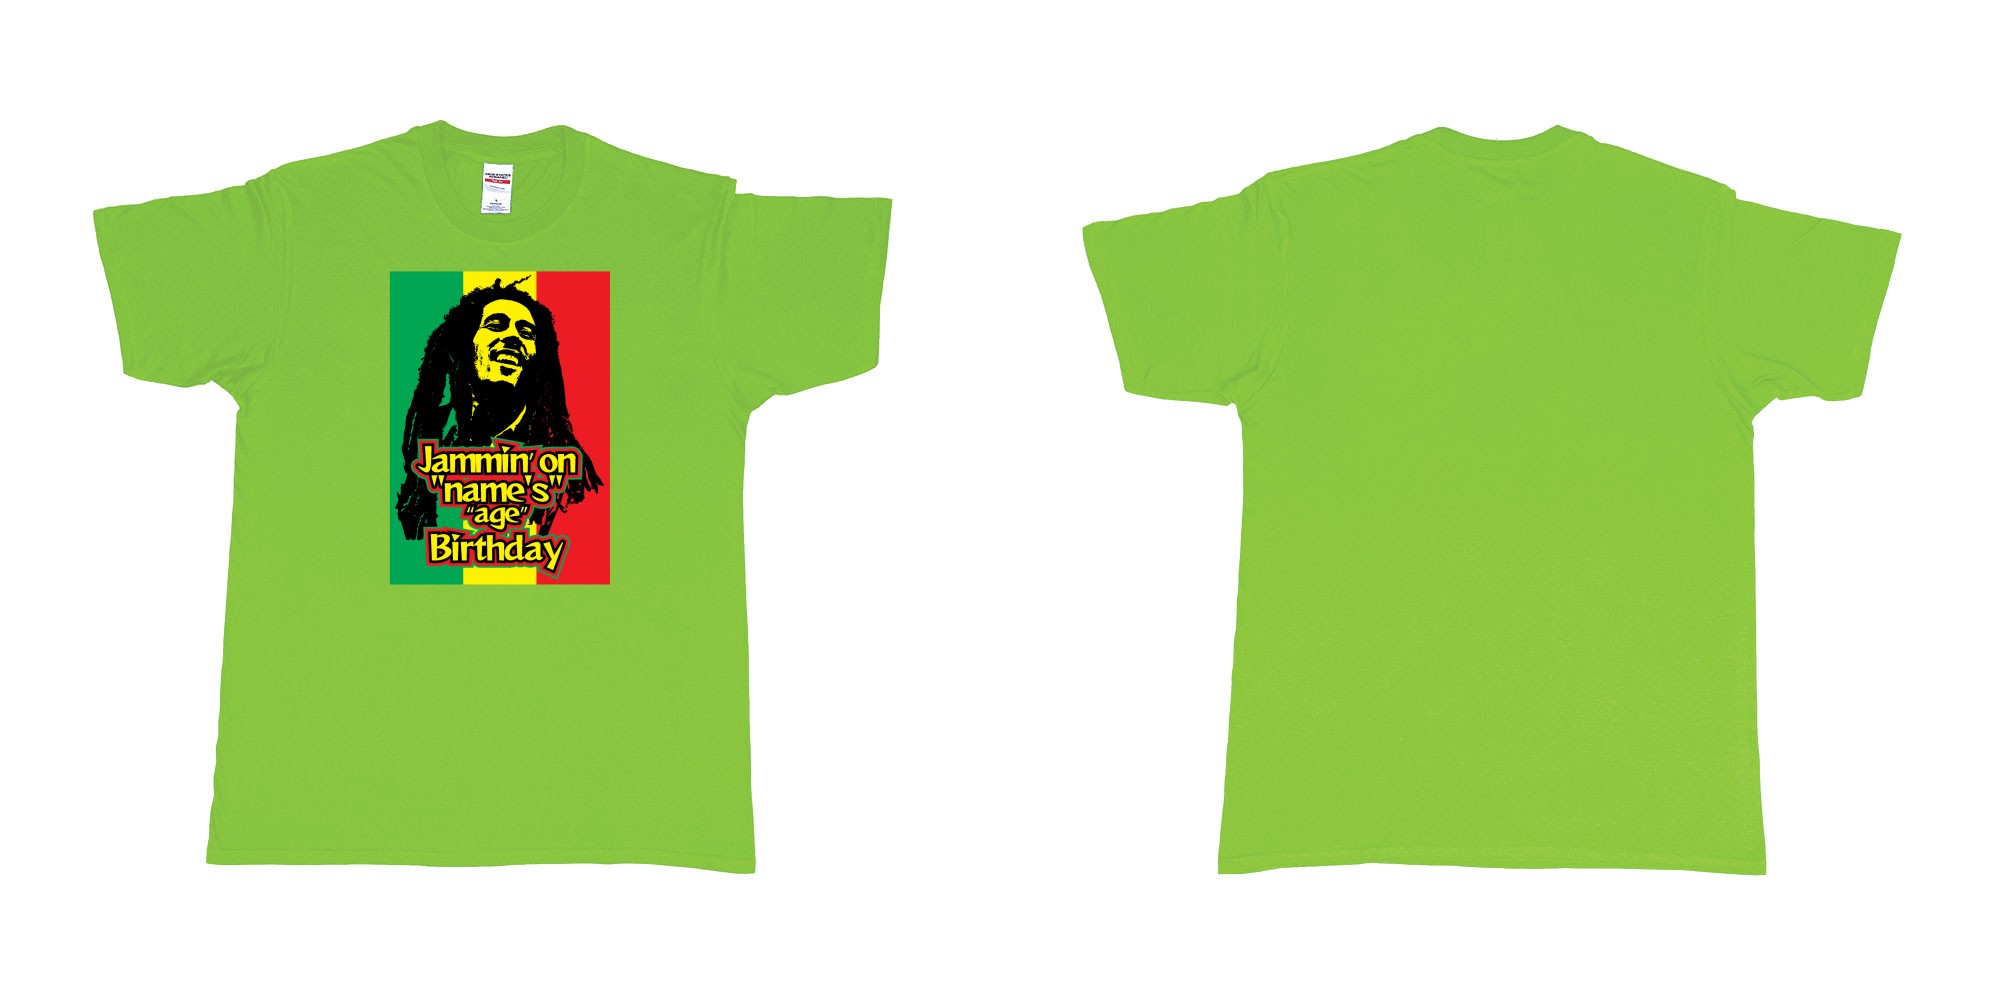 Custom tshirt design bob marley jammin on custom names birthday in fabric color lime choice your own text made in Bali by The Pirate Way